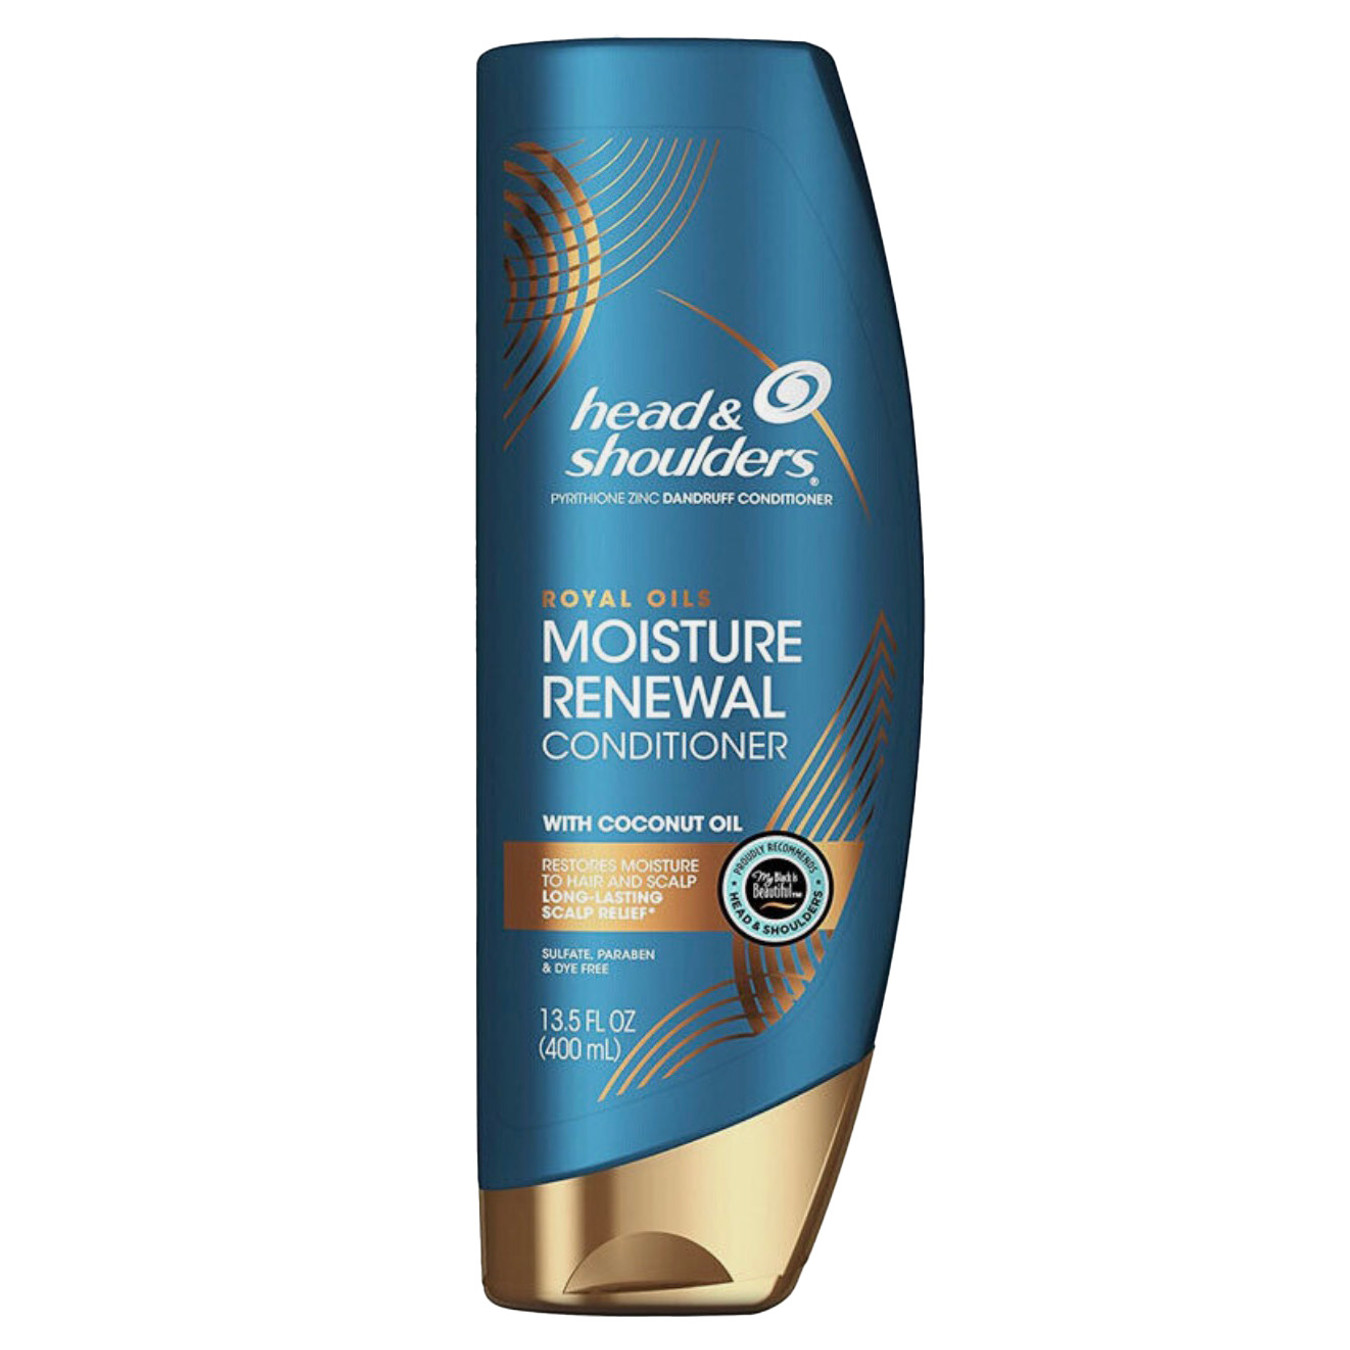 Head and Shoulders Royal Oils Moisture Renewal Conditioner with Coconut Oil (13.5 oz)